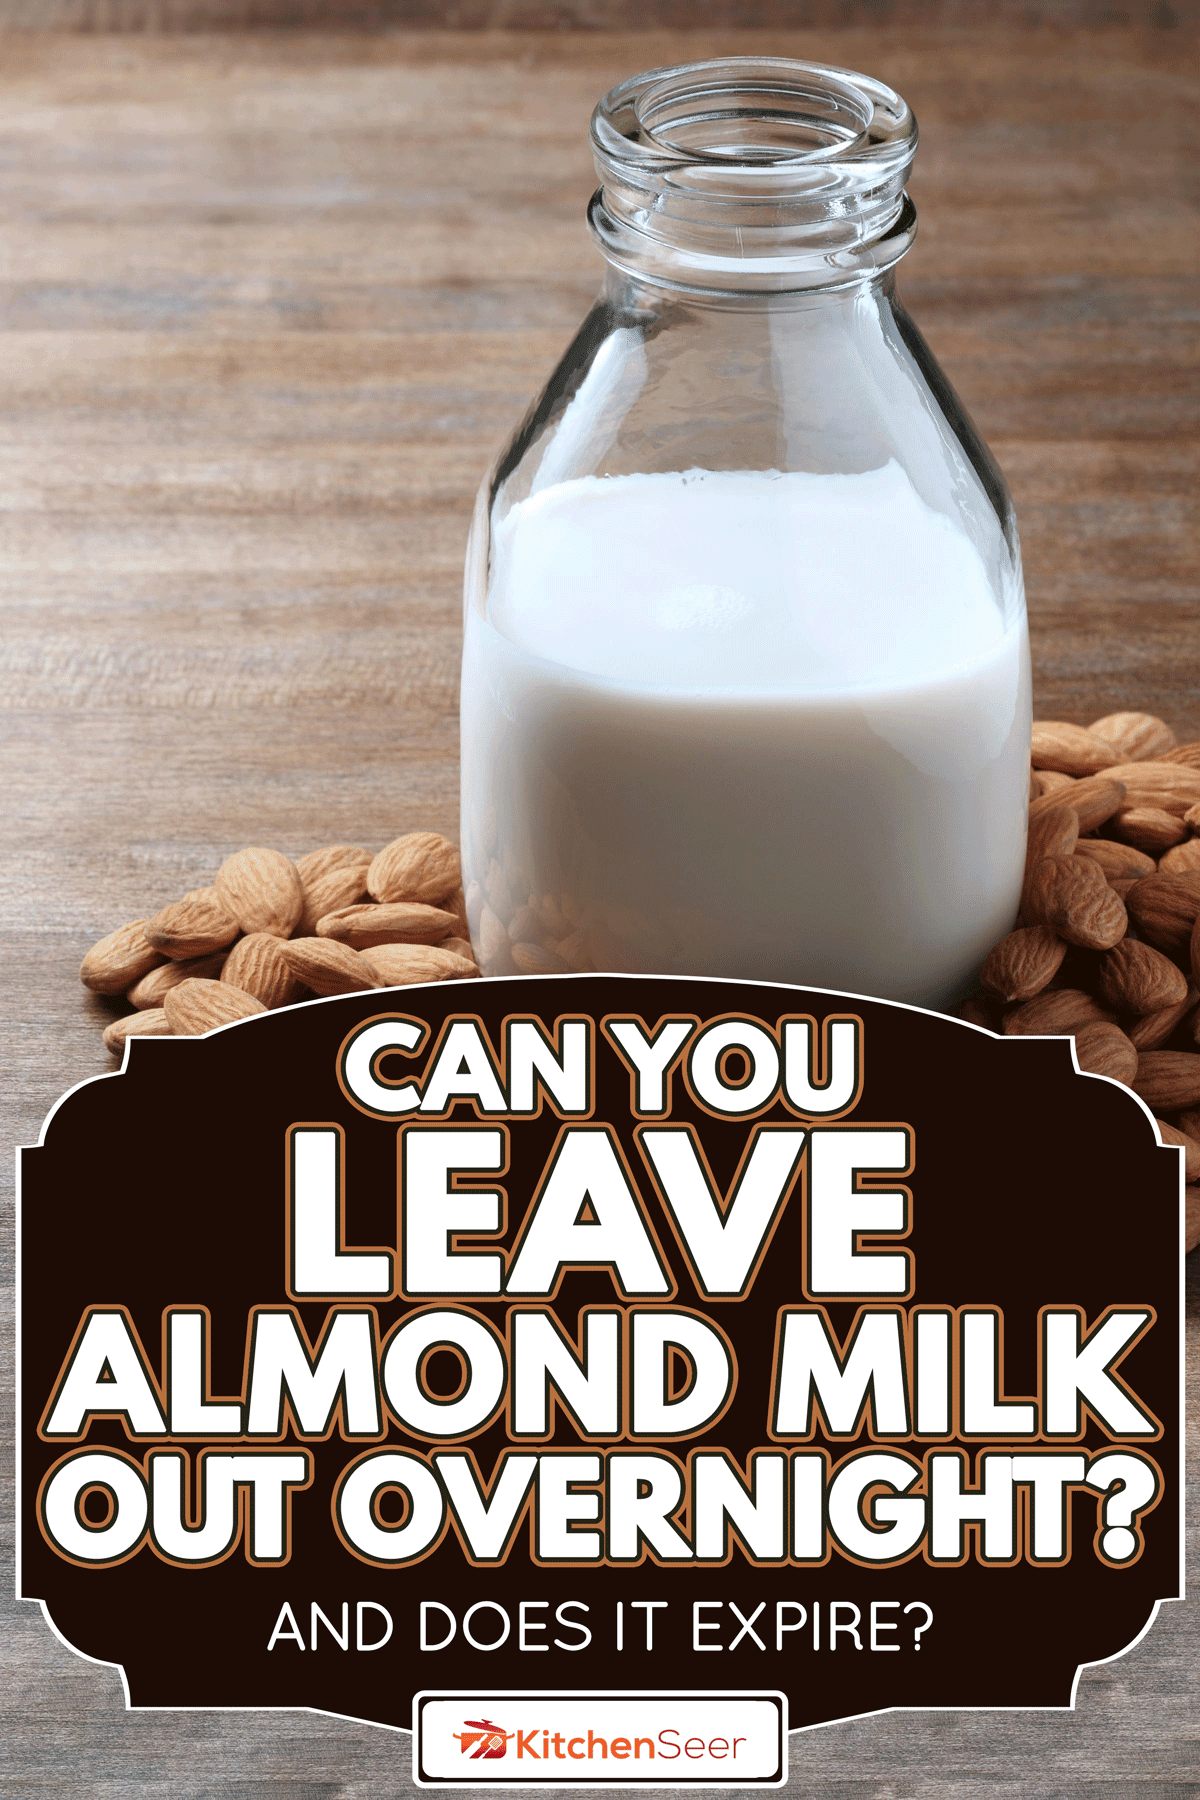 A bottle of almond milk surrounded by almonds, Can You Leave Almond Milk Out Overnight? [And Does It Expire?]